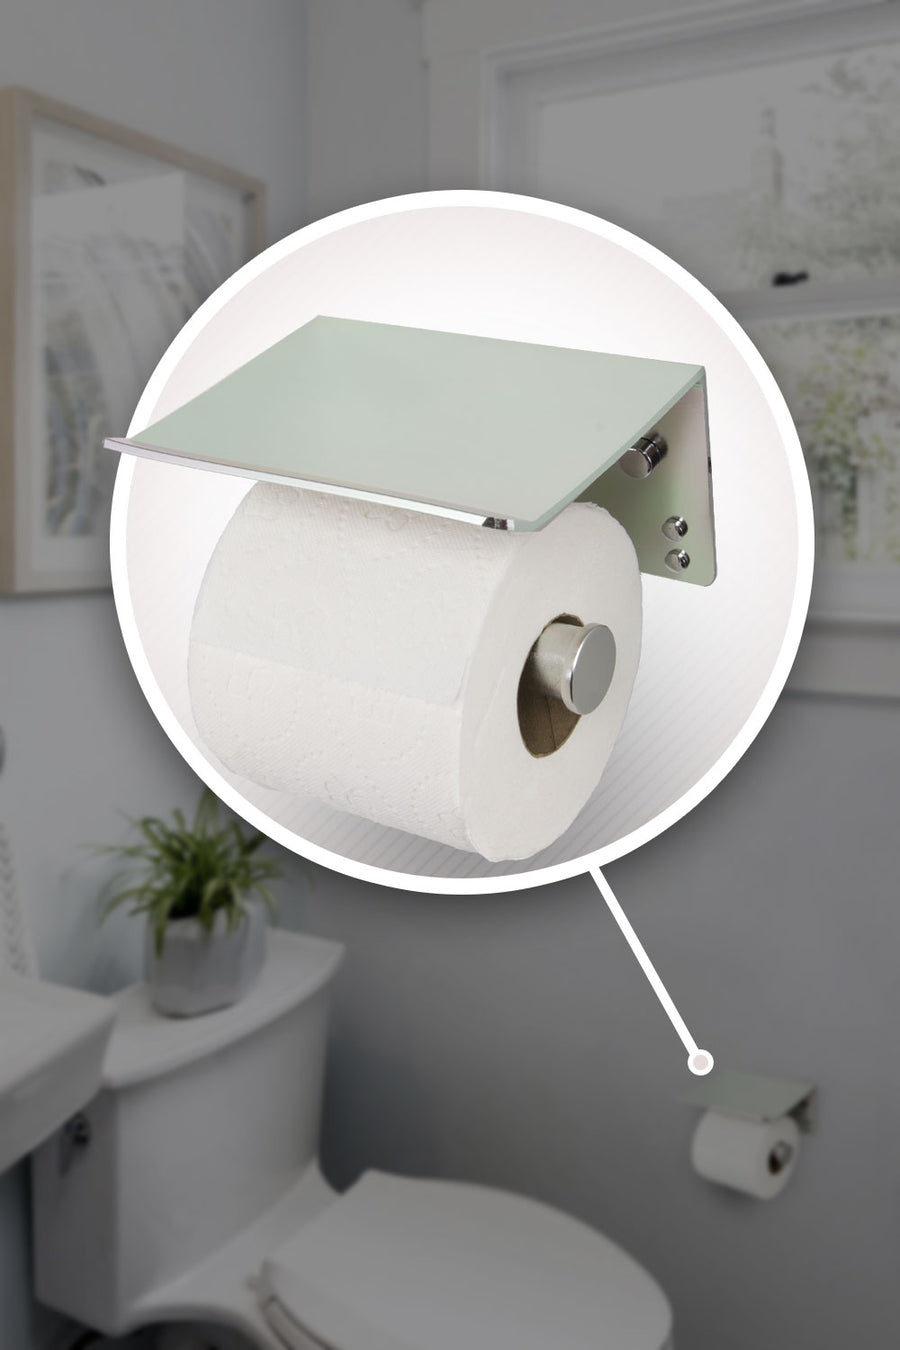 Toilet Paper Holder with Large Top Shelf